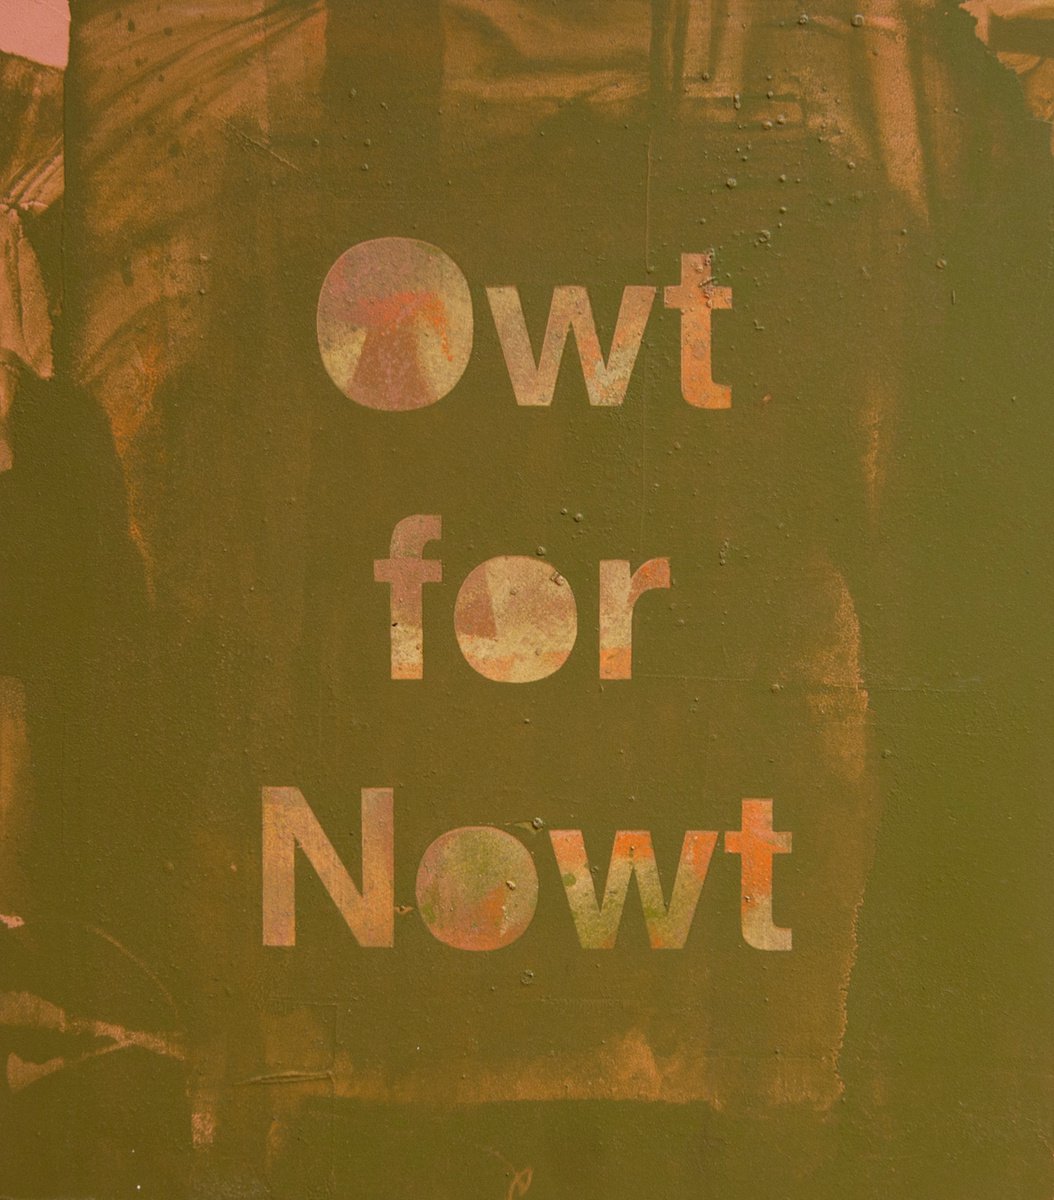 Owt for Nowt by Ian McKay